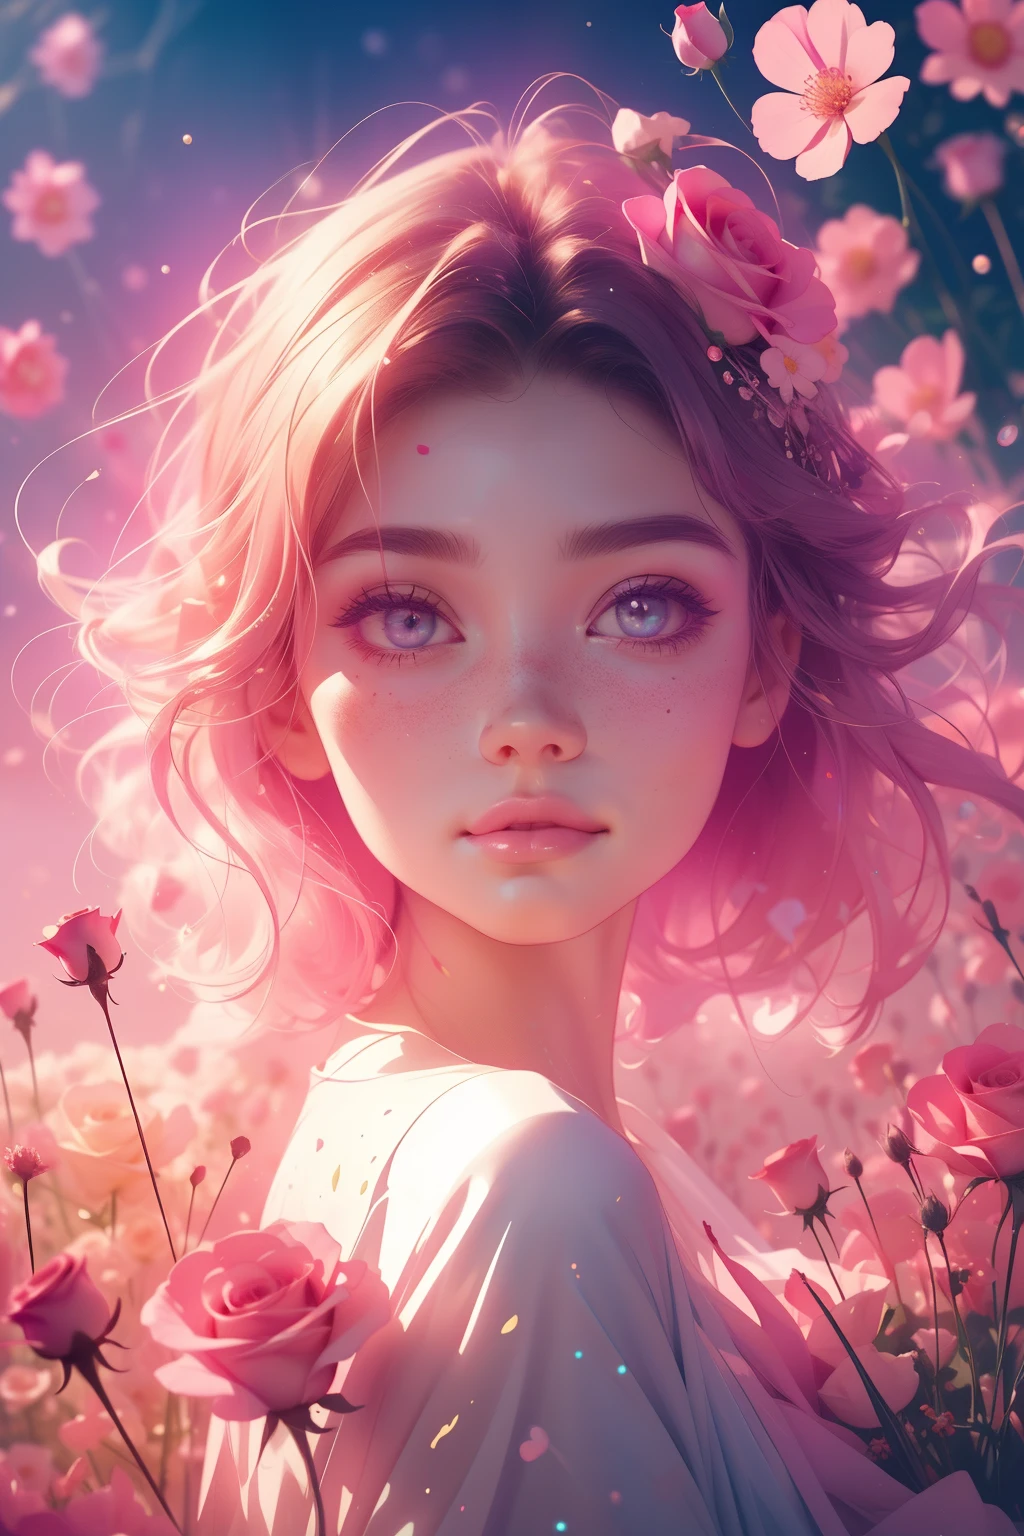 (This is a beautiful, intricate, (romatic) fantasy image that emphasizes beauty and grace.) Generate a blind curvy woman with soft natural freckles. Her face is important and should be (perfectly formed) with (beautiful puffy lips) and (perfect features). There is a cute freckle birthmark on her lip. The image exudes ethereal beauty and soft fantasy, with shimmering shades of pink throughout. Surround her with eternal roses in shimmering shades. Ensure perfection in her face, hair, and eyes. Include sweet and detailed birds and soft, luminous flowers and detailed roses. Utilize dynamic composition and dramatic lighting and cinematic lighting to create an interesting fantasy image. The background of the image is interesting and ultra-detailed, with soft fantasy lighting and gradients. Include fantasy details, cute aura, colorful, colourful, and interesting magical background. The image's background is decorated in shades of pink, shimmer, glitter, and fantasy details like colored bubbles and cosmos. Include subtle freckles, natural freckles and a diffused realistic skin tone. Incorporate elements of high fantasy, whimsy, and detailed elegance. English rose, princess, courtesan, noblewoman, sweet, lovely, calm, lovely, shimmering, glimmering, glittering, astrological fantasy, (((masterpiece))), (highest quality), magic rose, fantasy garden, beautiful face, perfect face, puffy lips, interesting, shy smile, fantasy elements, magic rose, beautiful eyes, perfect puffy lips, jewel tones, luminosity. Taken with a canon camera.